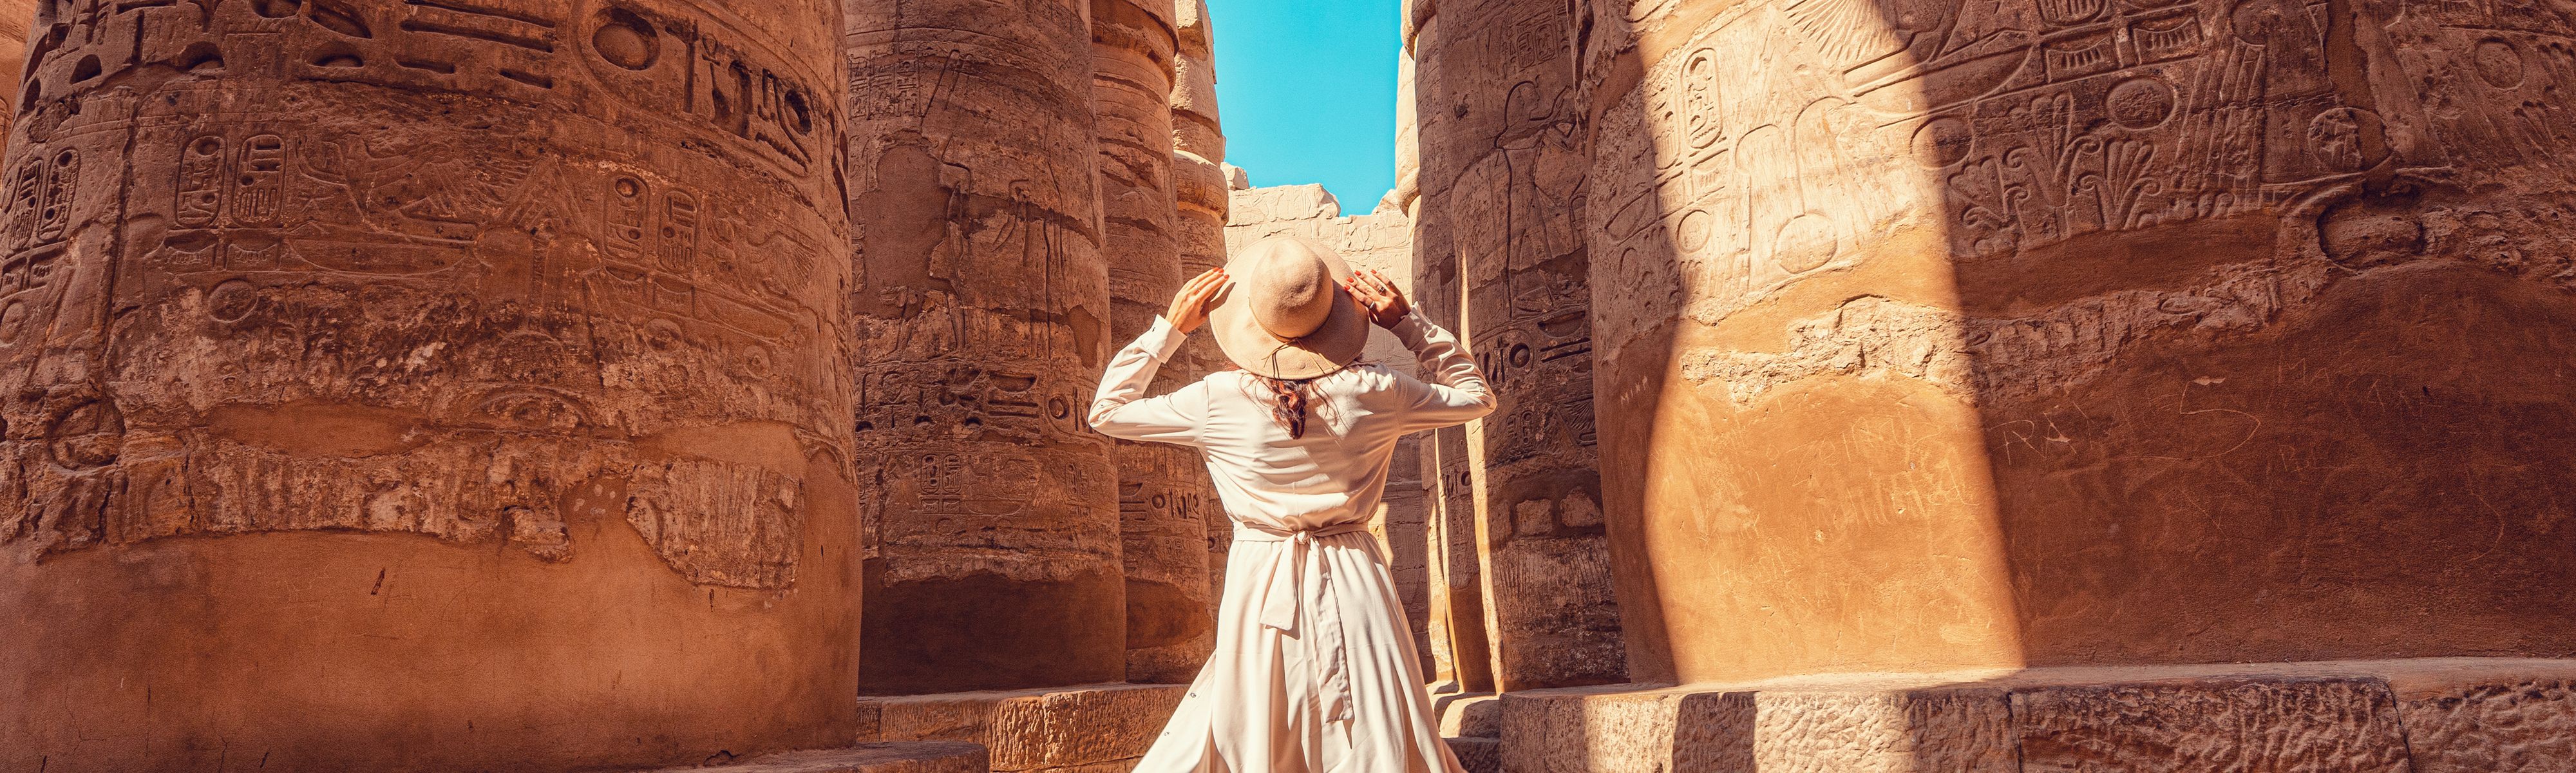 woman holding her tan hat looking up at the pillars in egypt